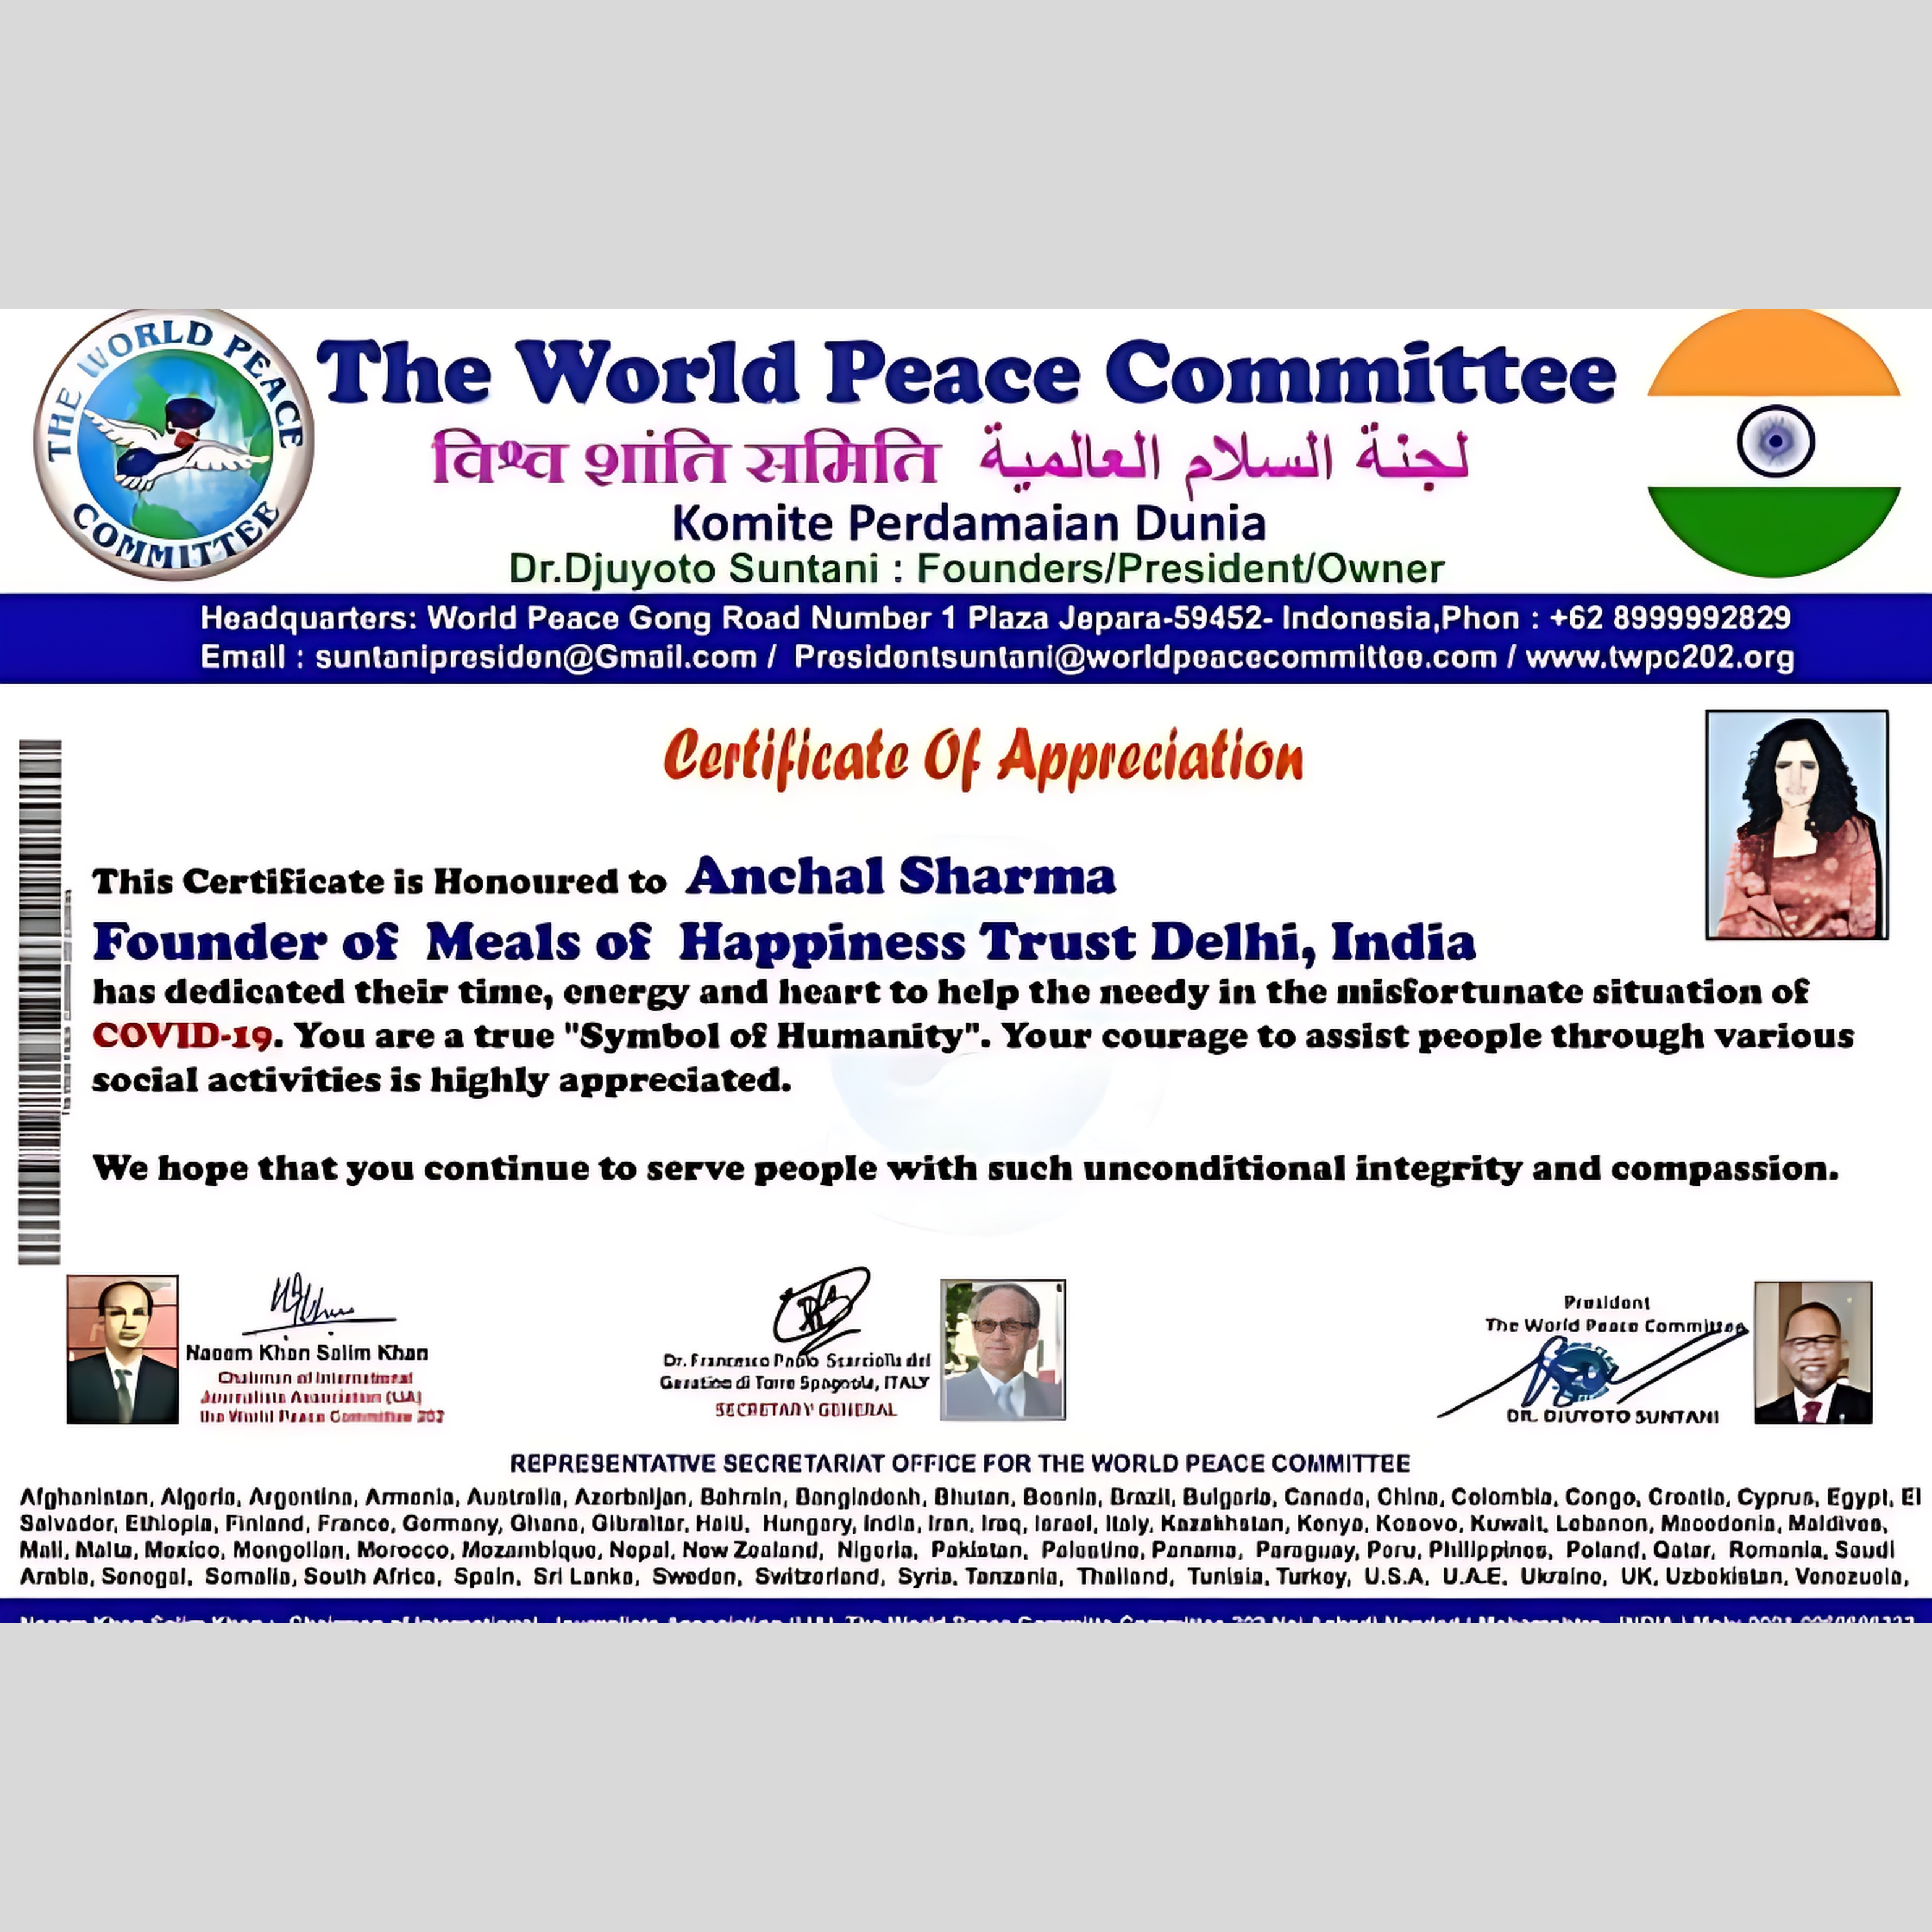 Certificate of Appreciation (2020) - THE WORLD PEACE COMMITTEE